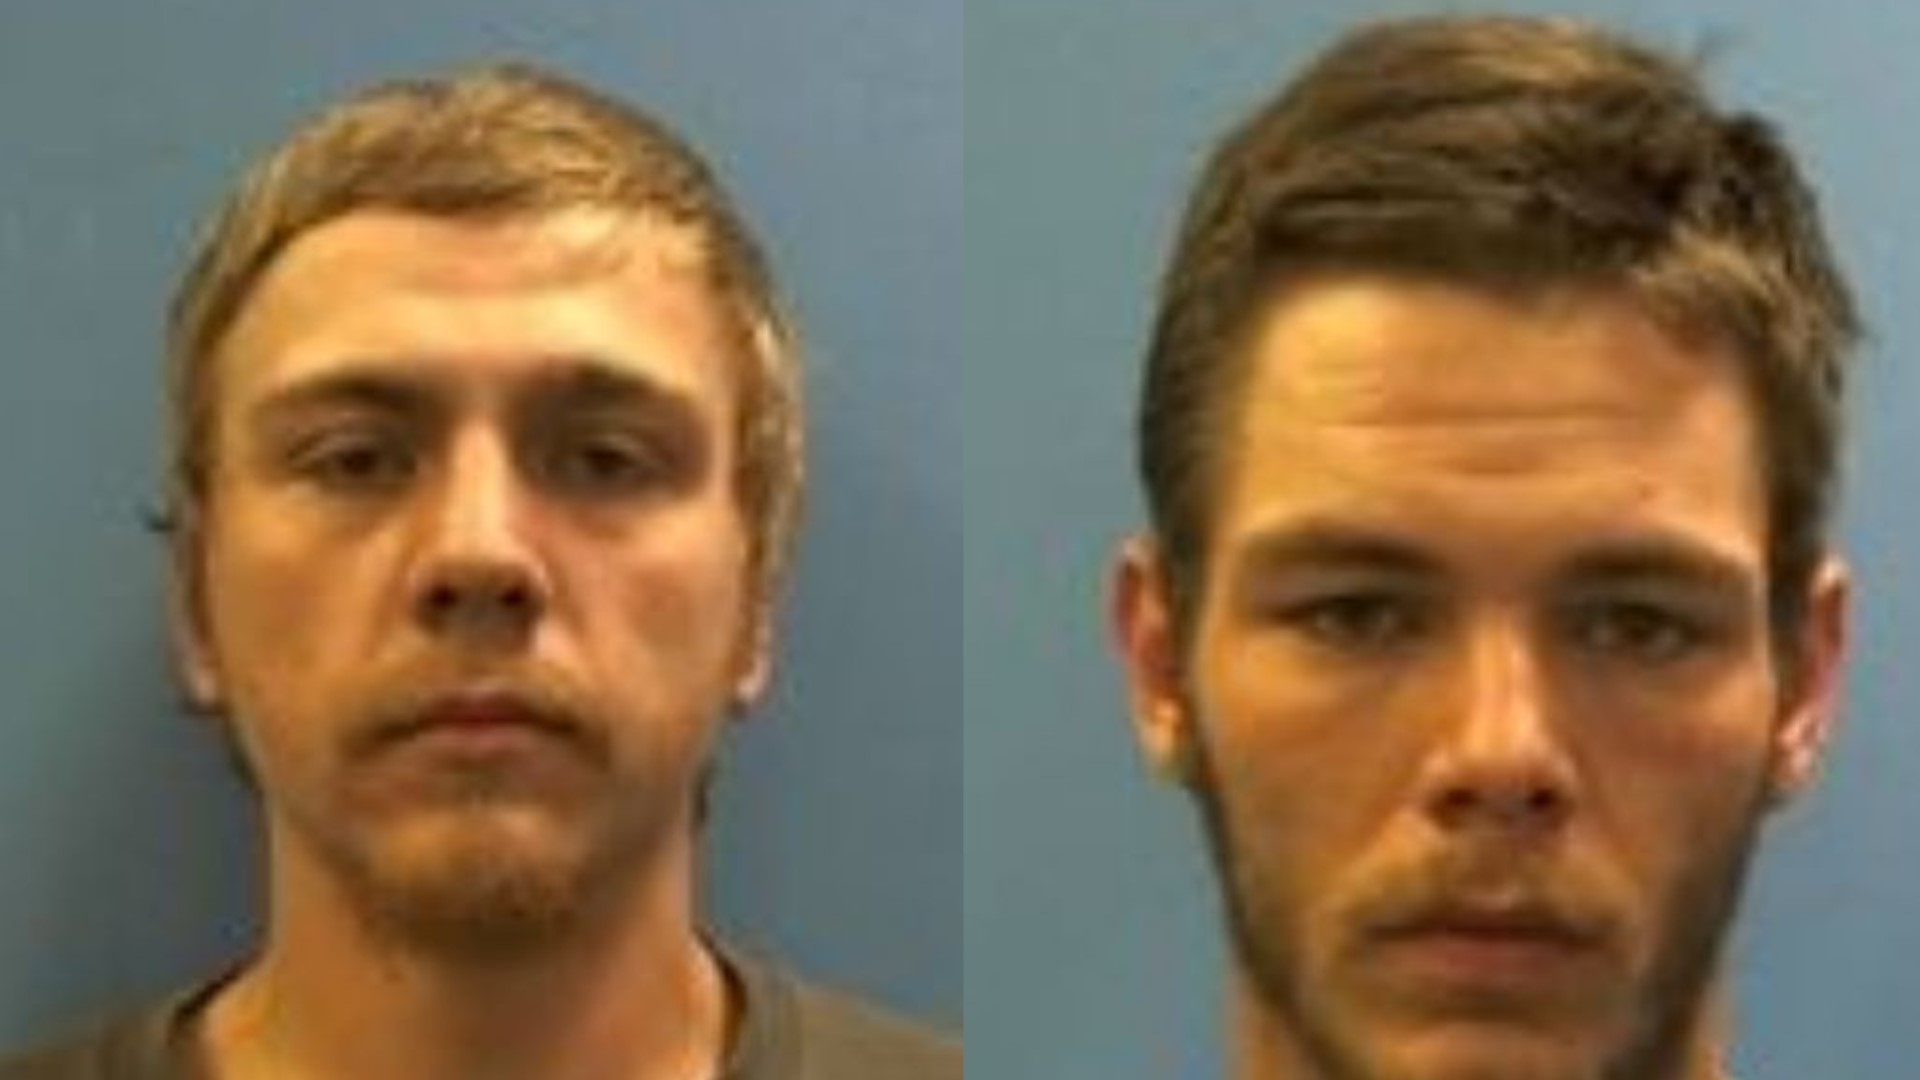 Police in Clinton, Arkansas picked up the two men Wednesday in connection with the death of a man found shot in the back in Waco.